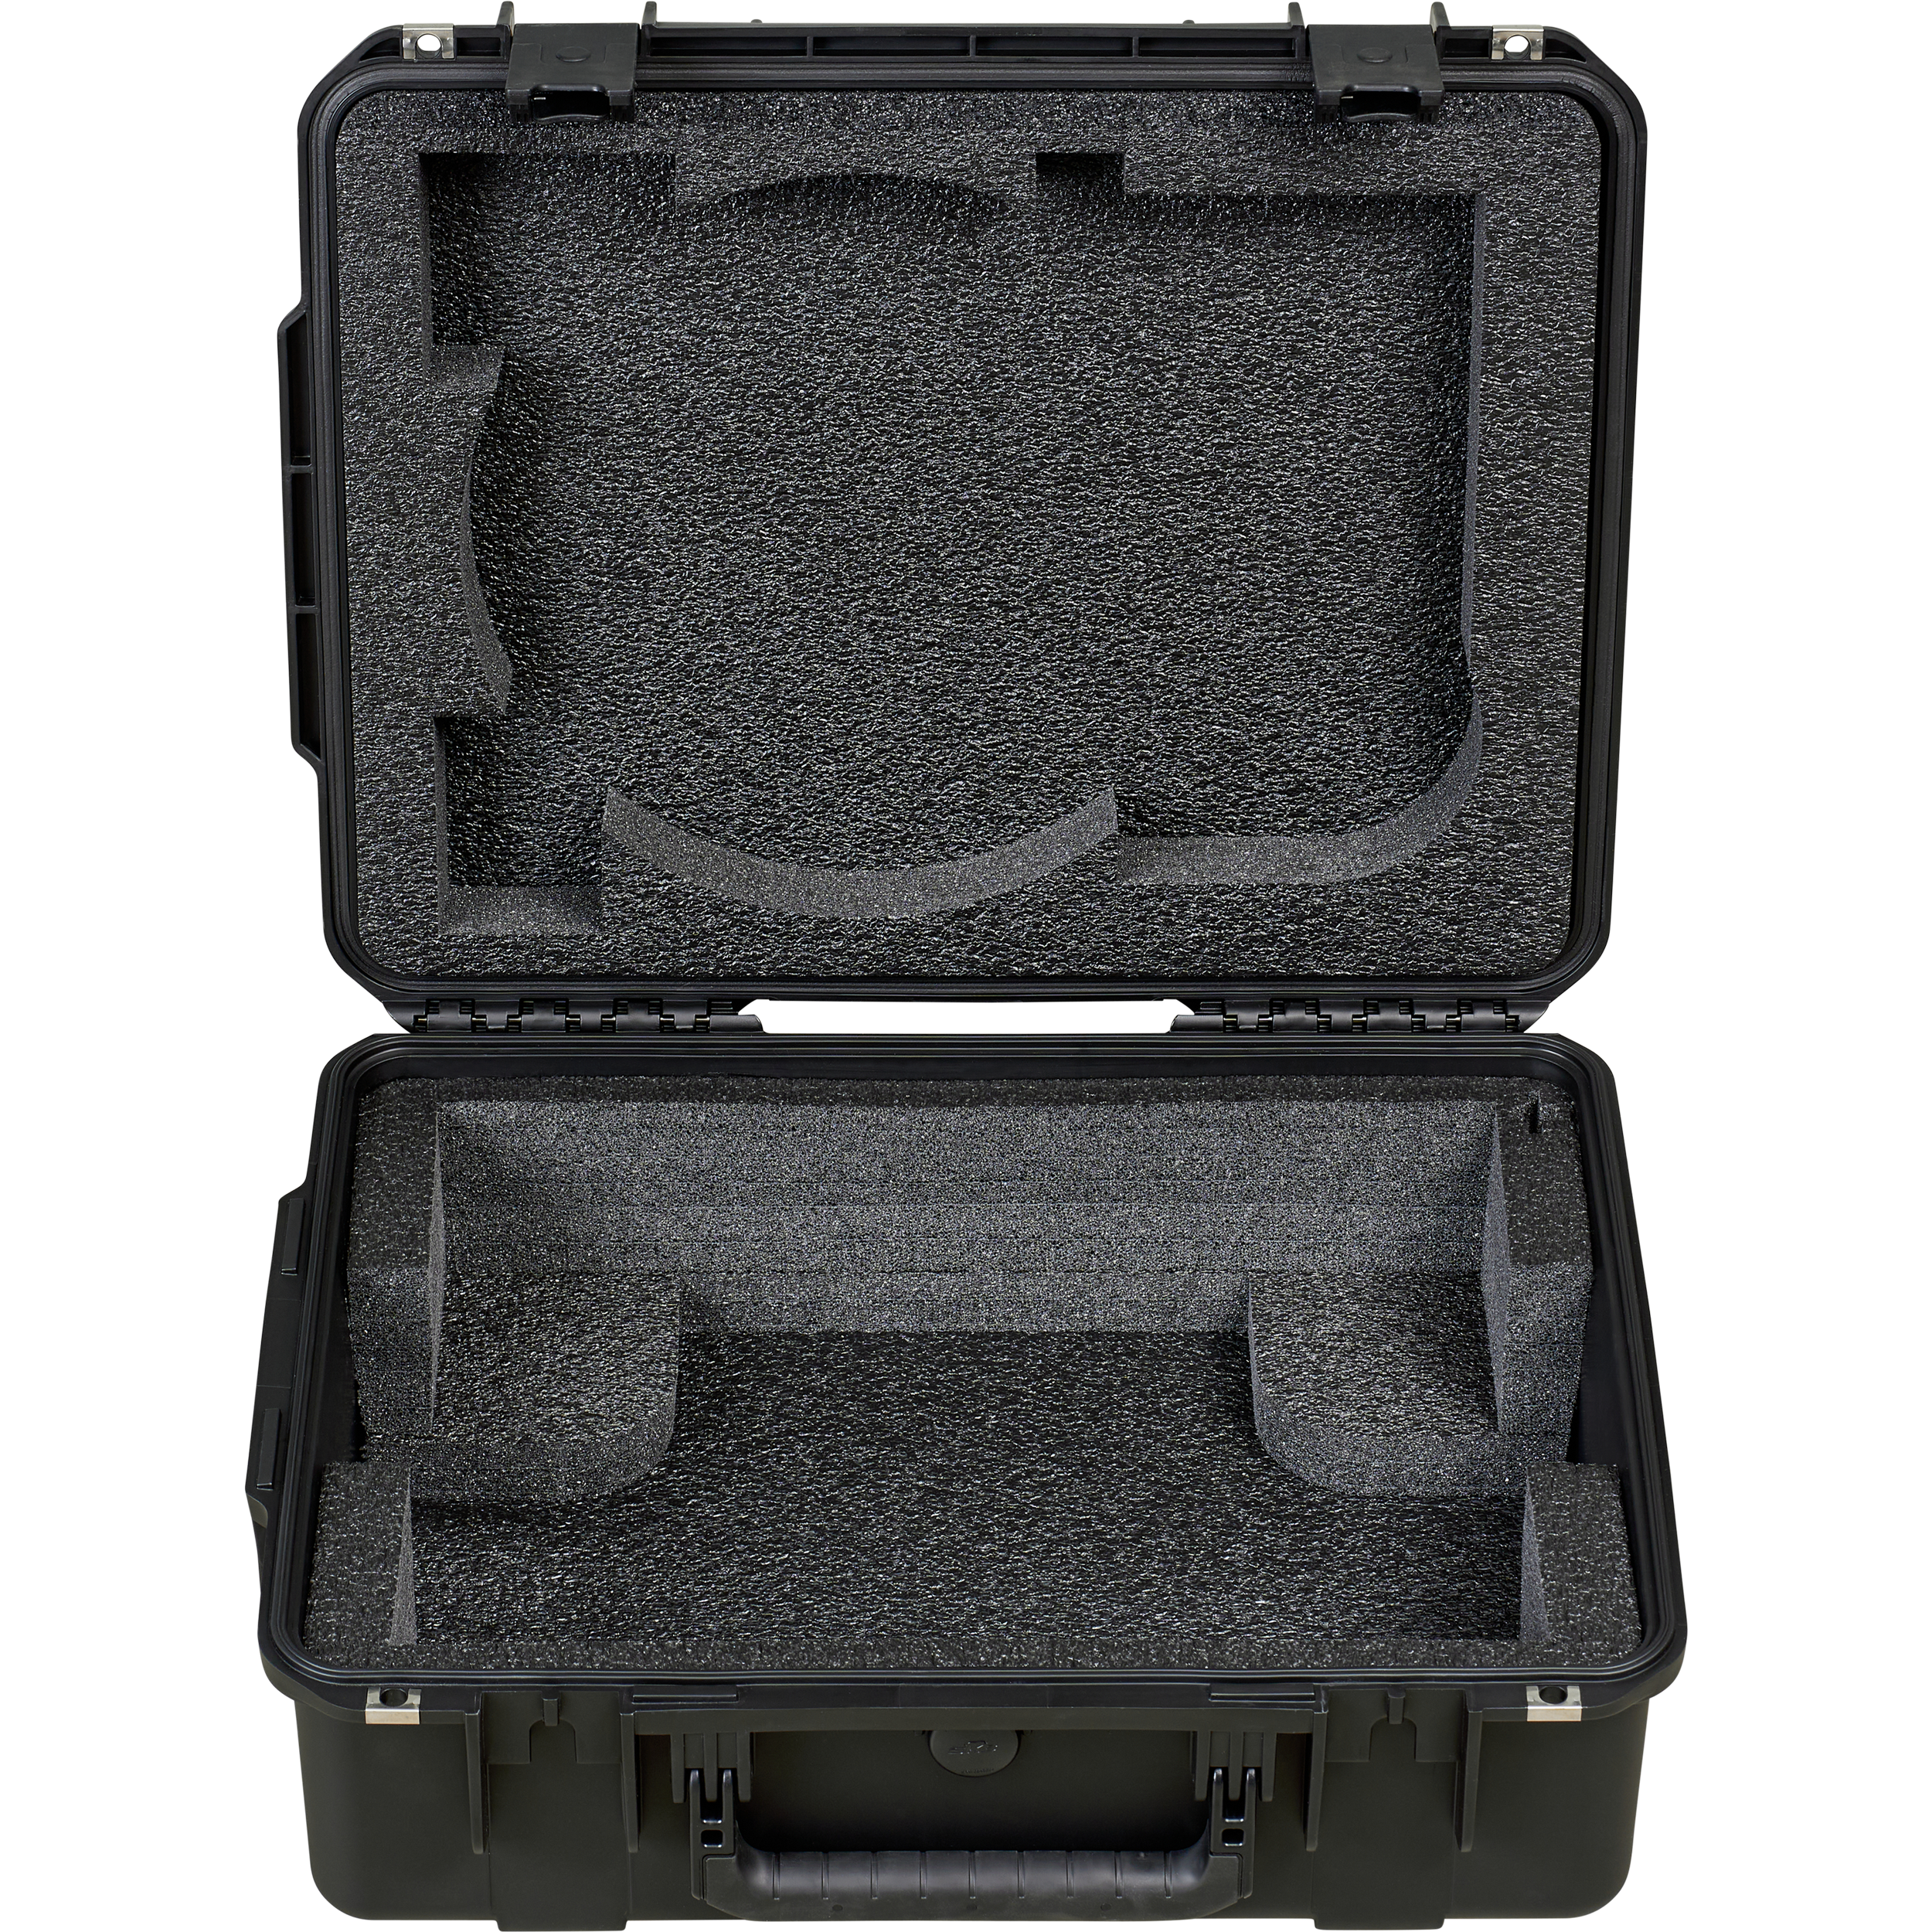 BYFP ipCase for Pioneer PLX-CRSS12